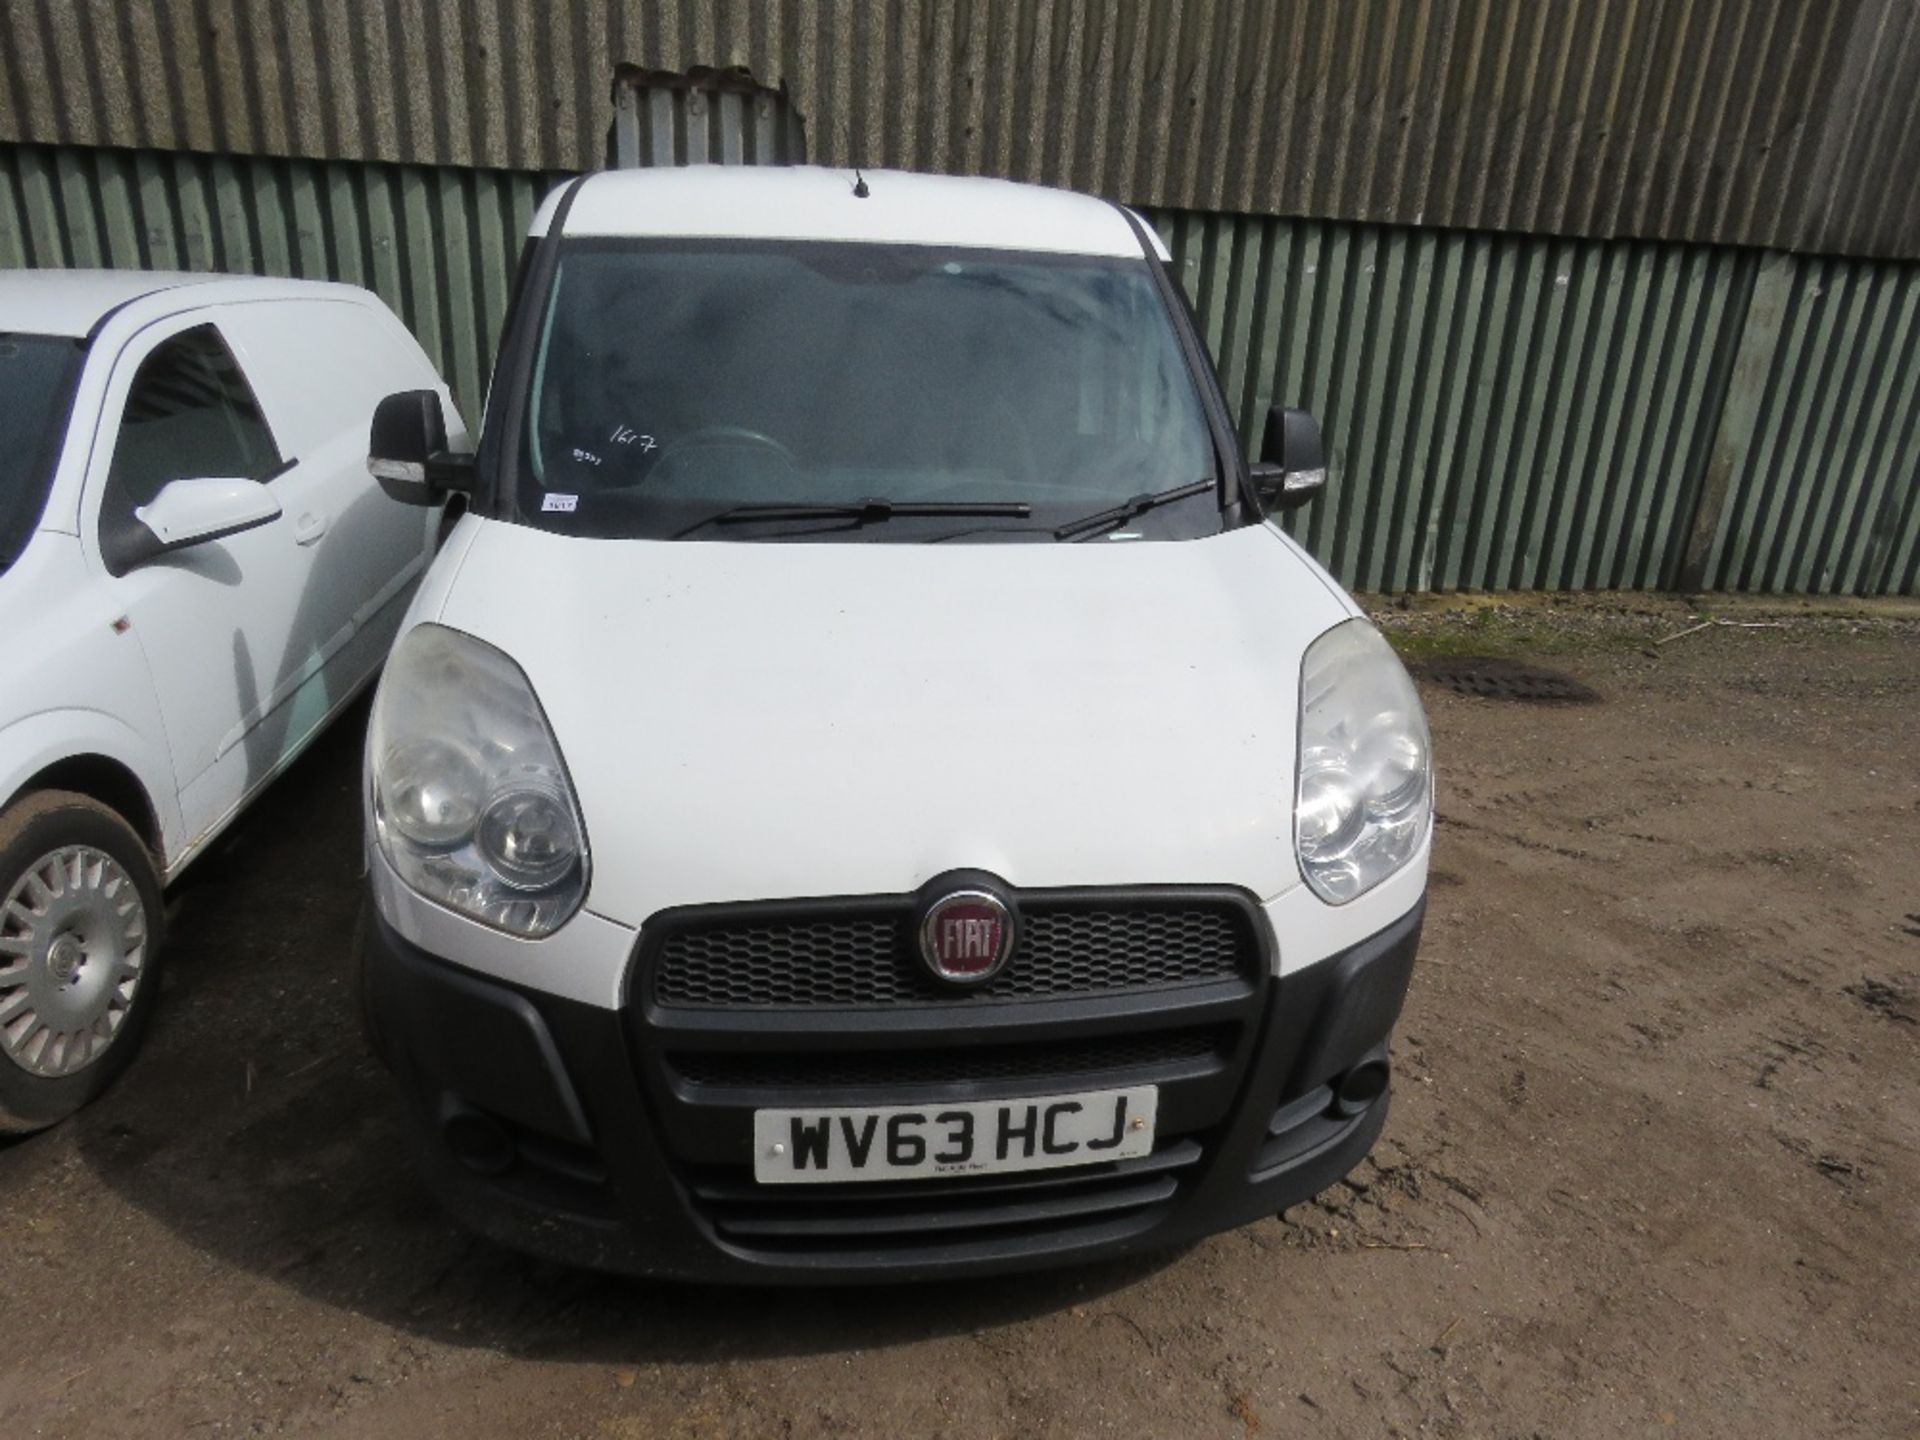 FIAT DOBLO PANEL VAN REG: WV63 HCJ. 84343 REC MILES. WHEN TESTED WAS SEEN TO DRIVE, STEER AND BRAKE. - Image 2 of 12